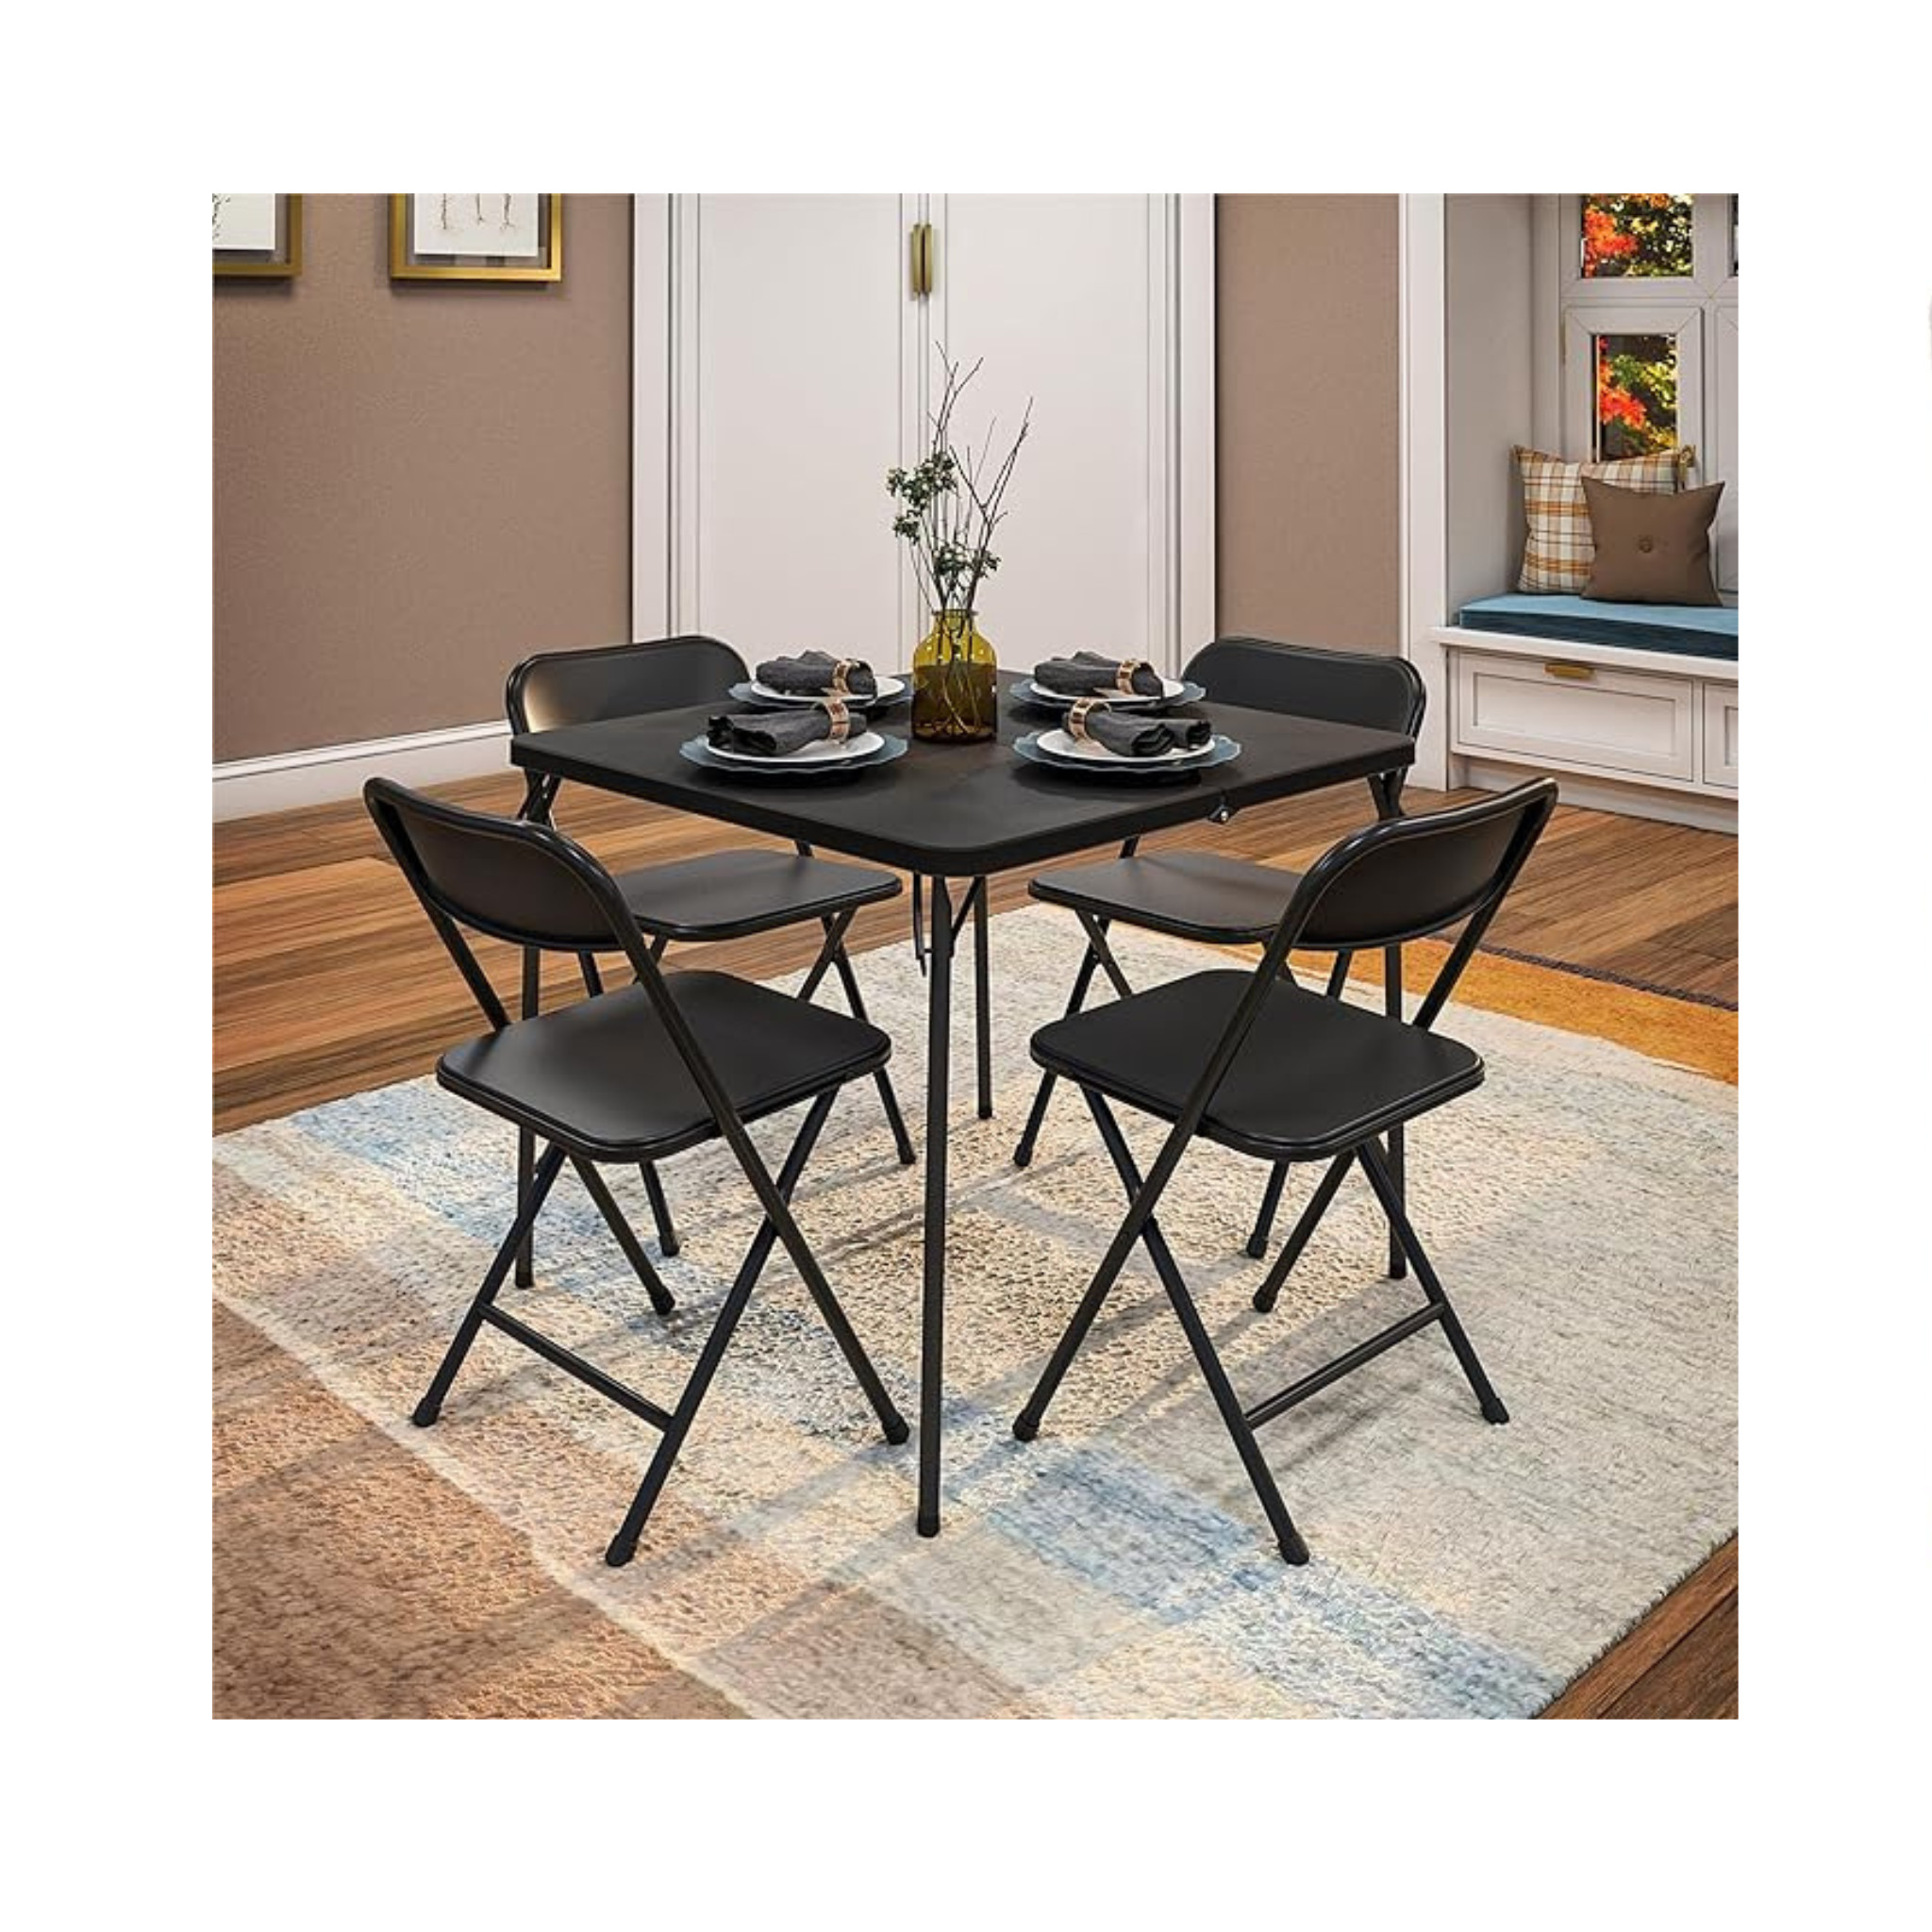 COSCO Indoor/Outdoor Solid Resin Folding Table & Chair Dining Set